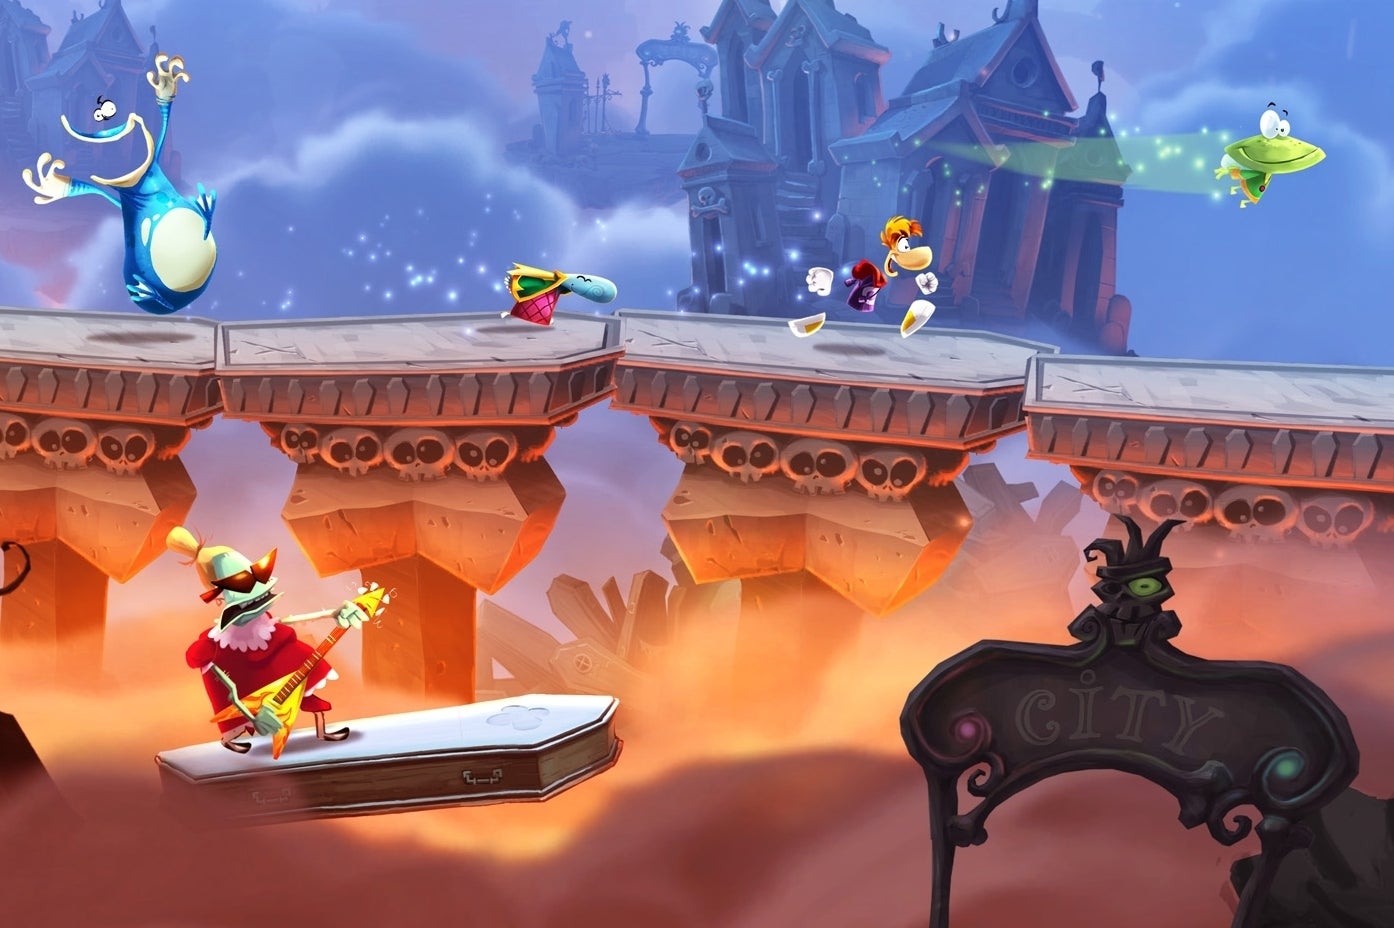 Image for Rayman Legends is coming to PS4 and Xbox One in February